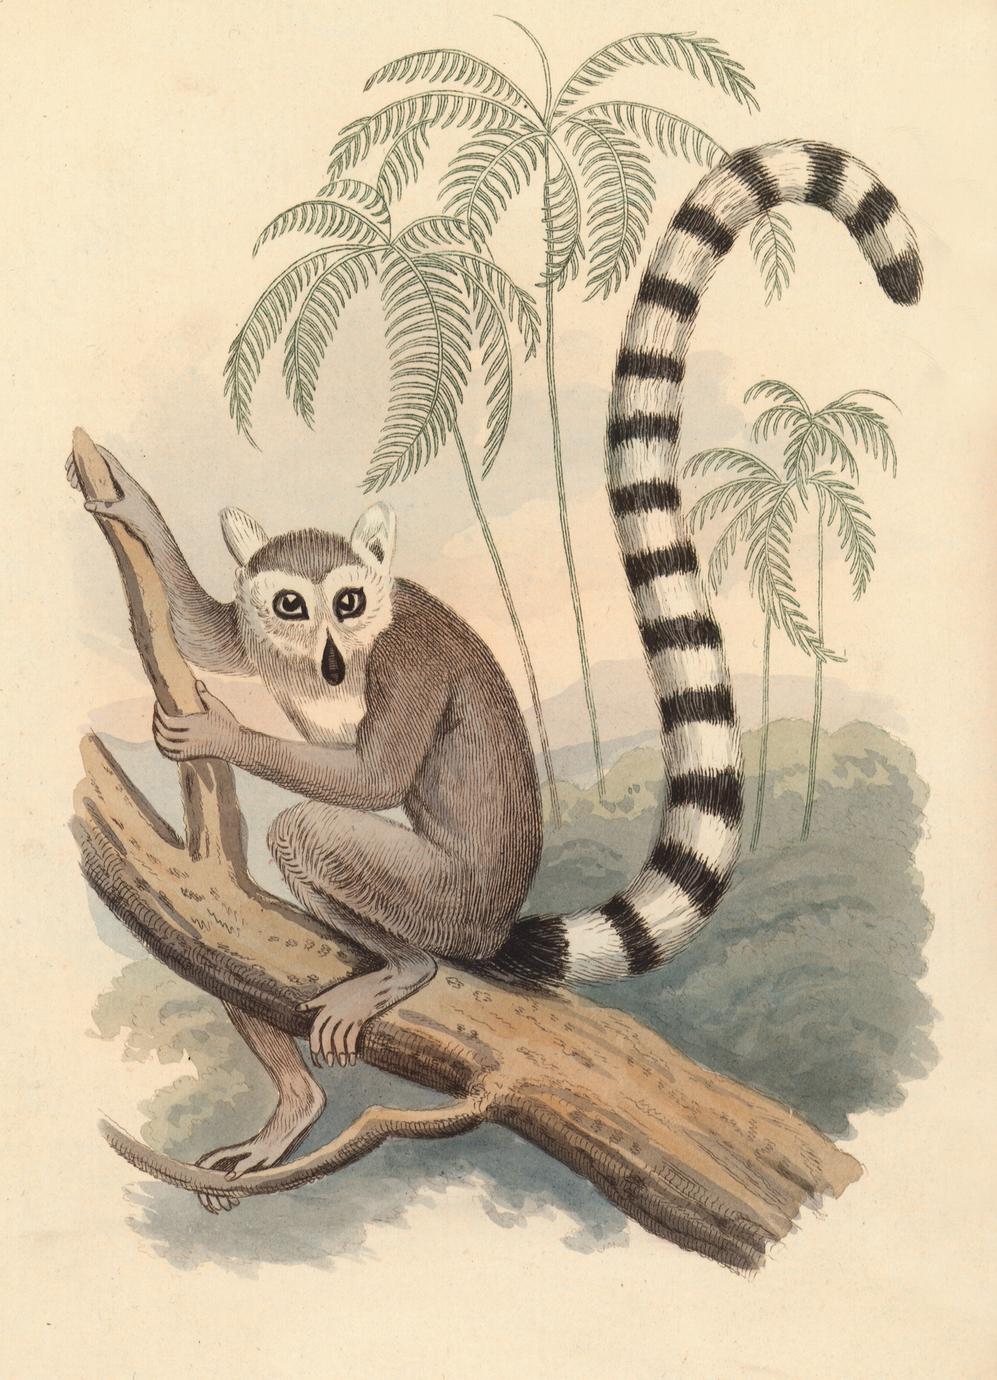 The Ring Tailed Lemur